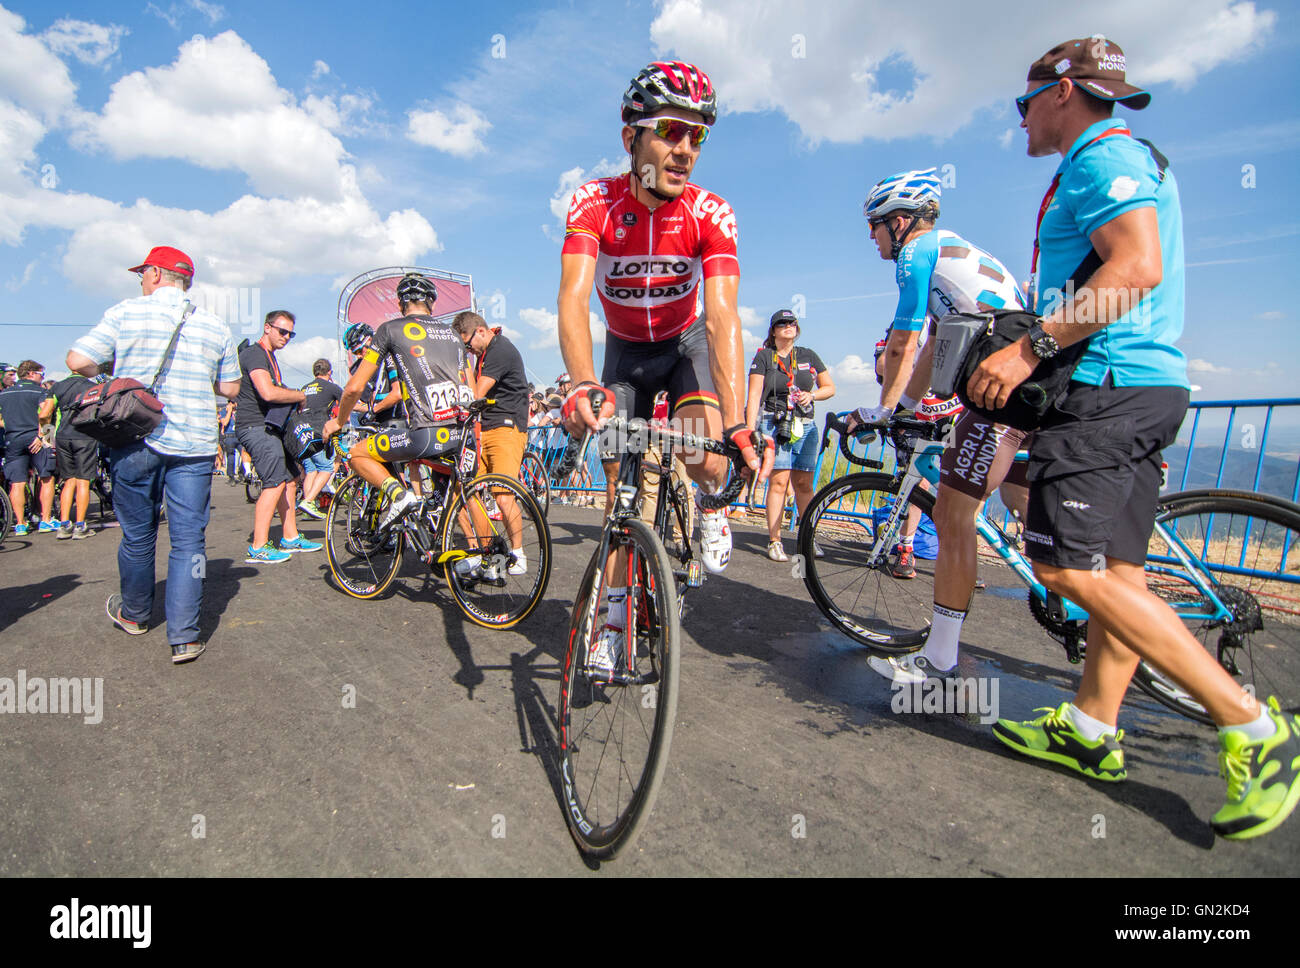 La Camperona, Spain. 27th August, 2016. Adam Hansen (Lotto Soudal) finishes the 8th stage of cycling race ‘La Vuelta a España’ (Tour of Spain) between Villalpando and Climb of La Camperona on August 27, 2016 in Leon, Spain. Credit: David Gato/Alamy Live News Stock Photo